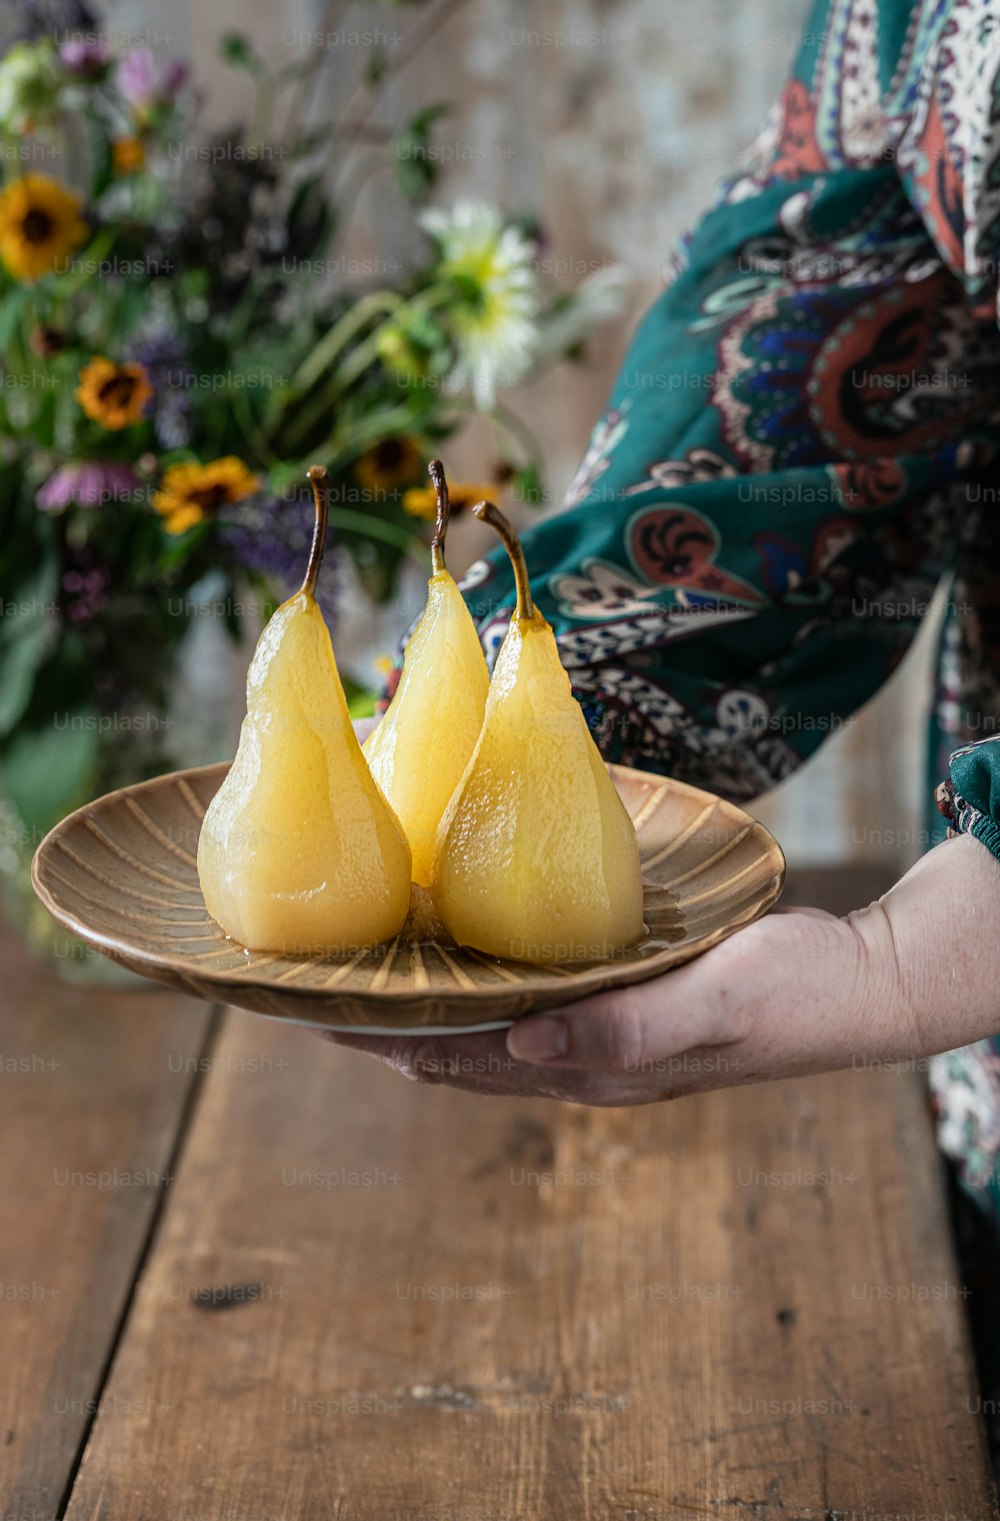 a person holding a plate with two pears on it